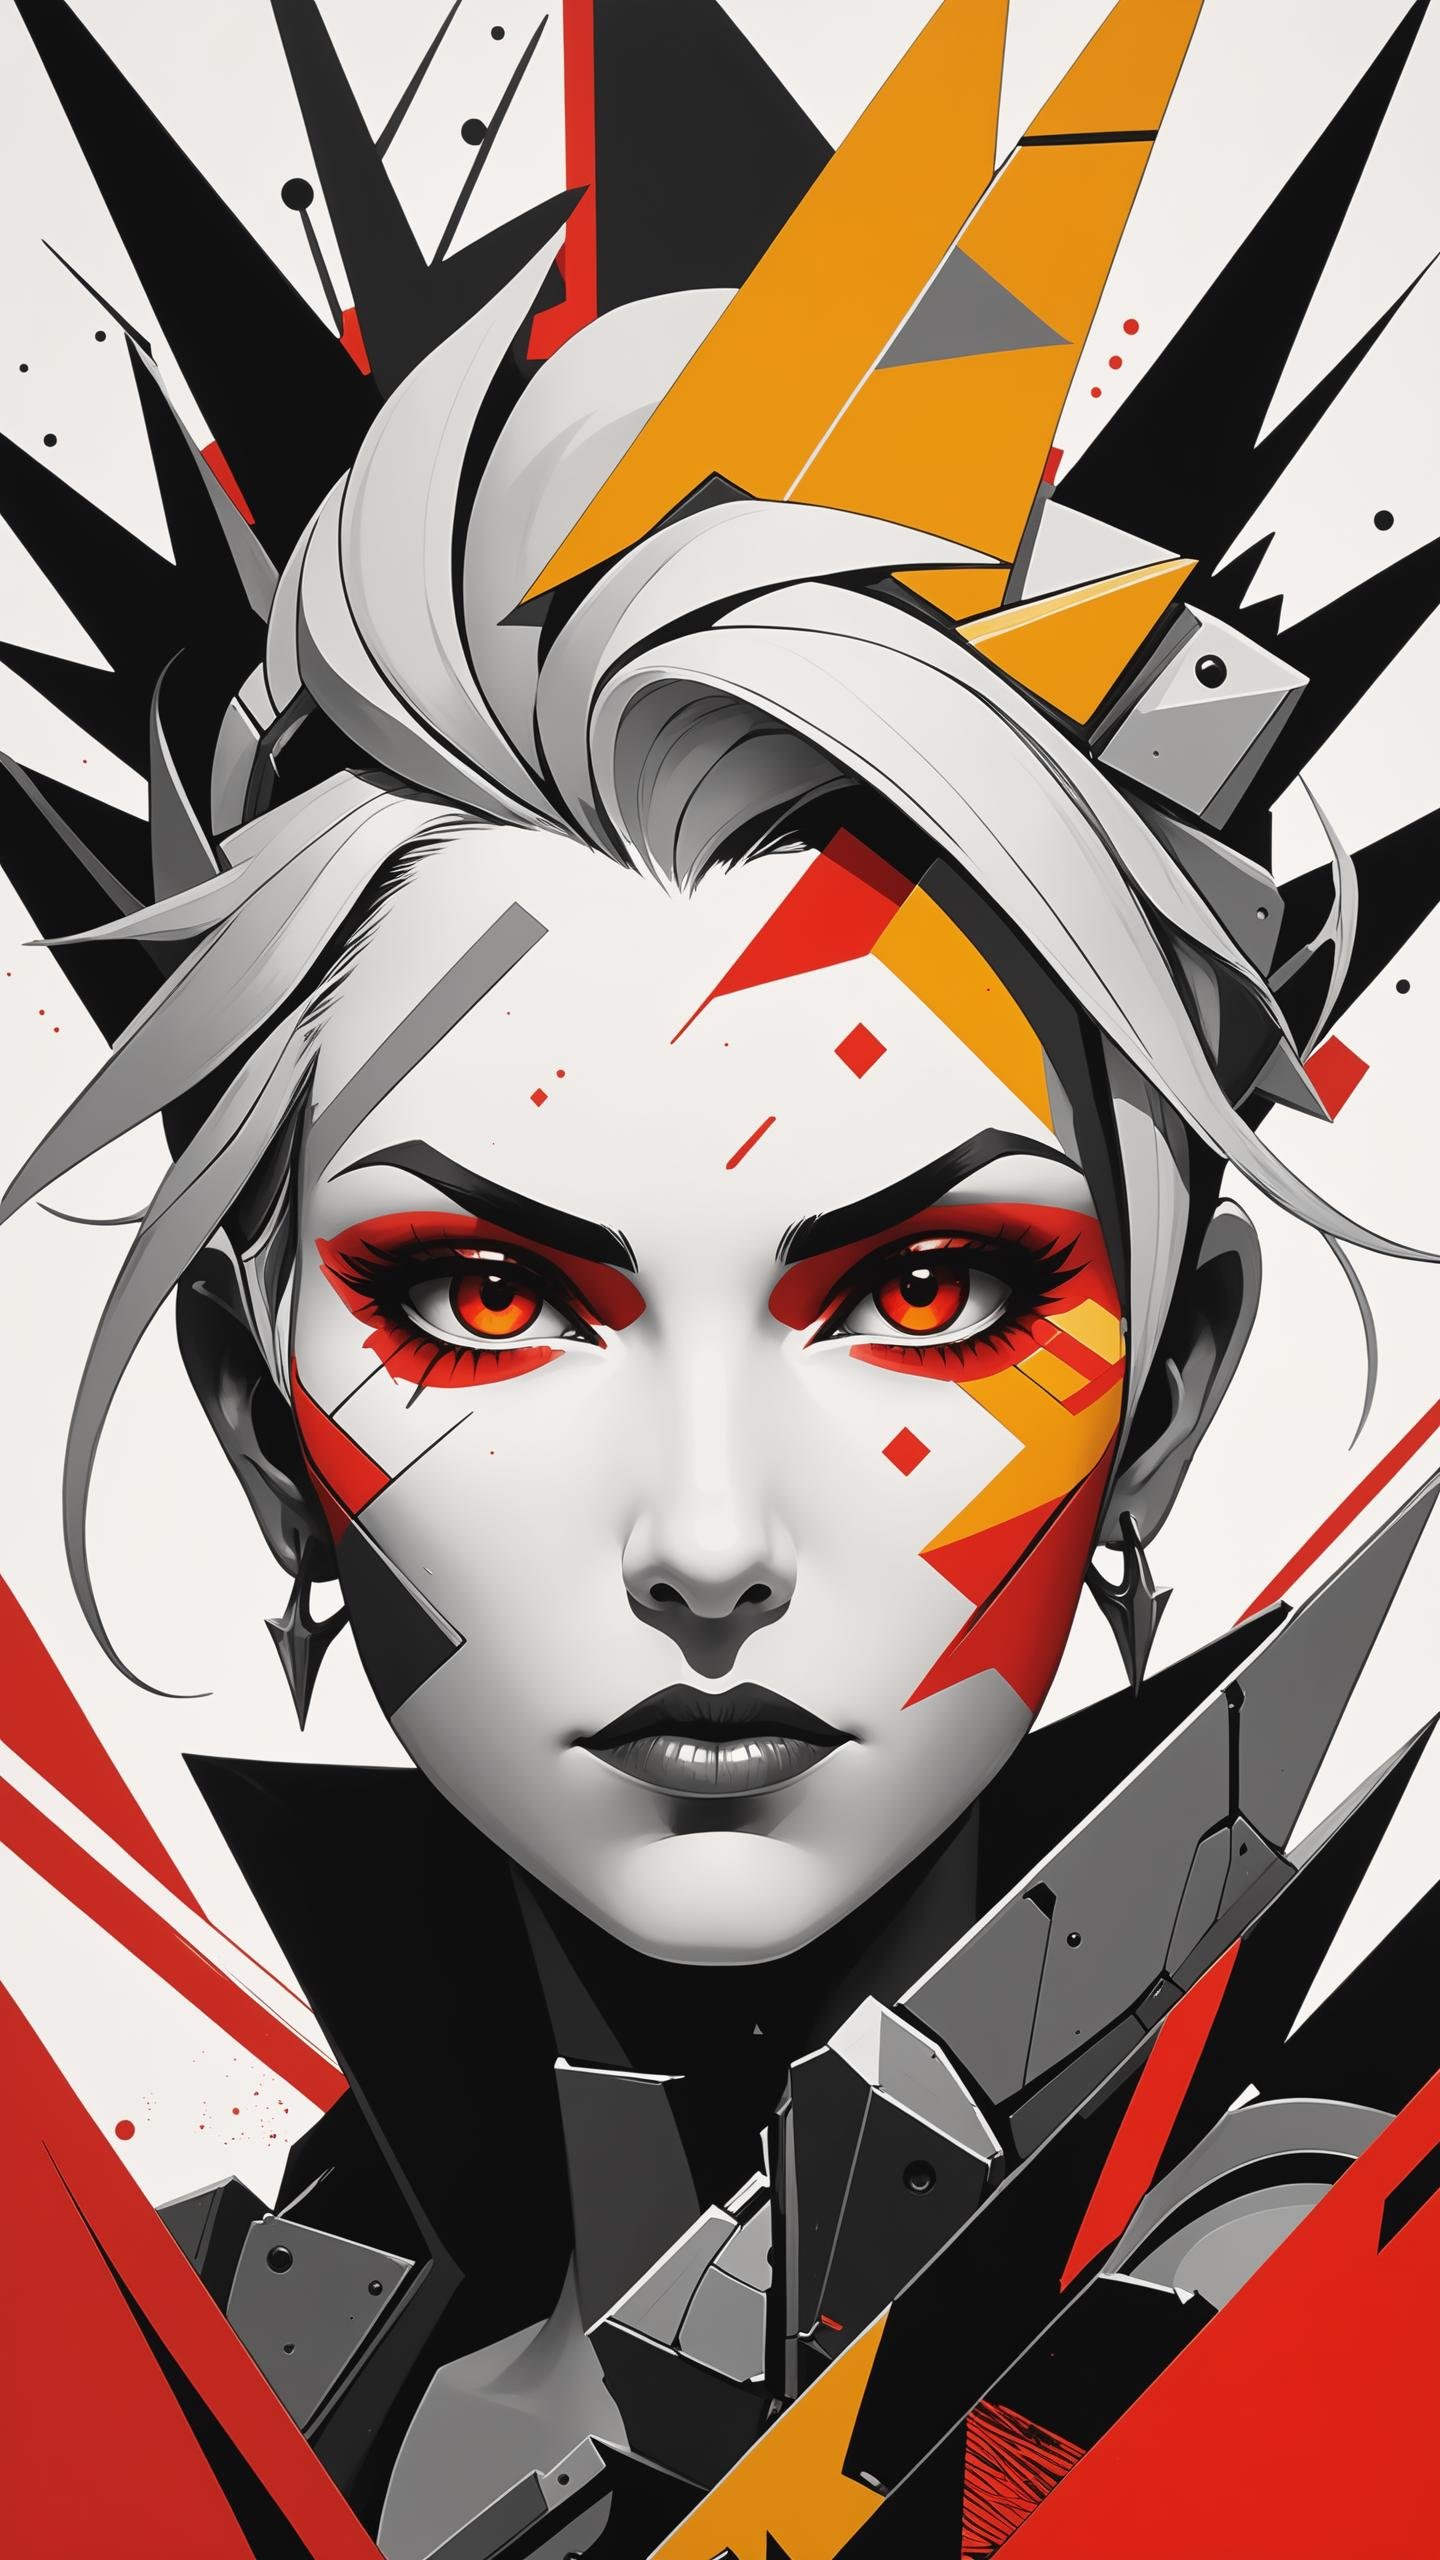 A poster of the Junker Queen from Overwatch, in the style of Dau-al-Set, Pollock, and inspired by MAPPA and Zdzislaw Beksinski, The poster features a close-up of the Junker Queen's face, with bold, abstract brushstrokes in shades of red, orange, and yellow, The background is a chaotic, abstract landscape with jagged, geometric shapes in shades of black white and gray, The overall effect is both beautiful and unsettling, capturing the essence of the Junker Queen's fierce and unpredictable nature